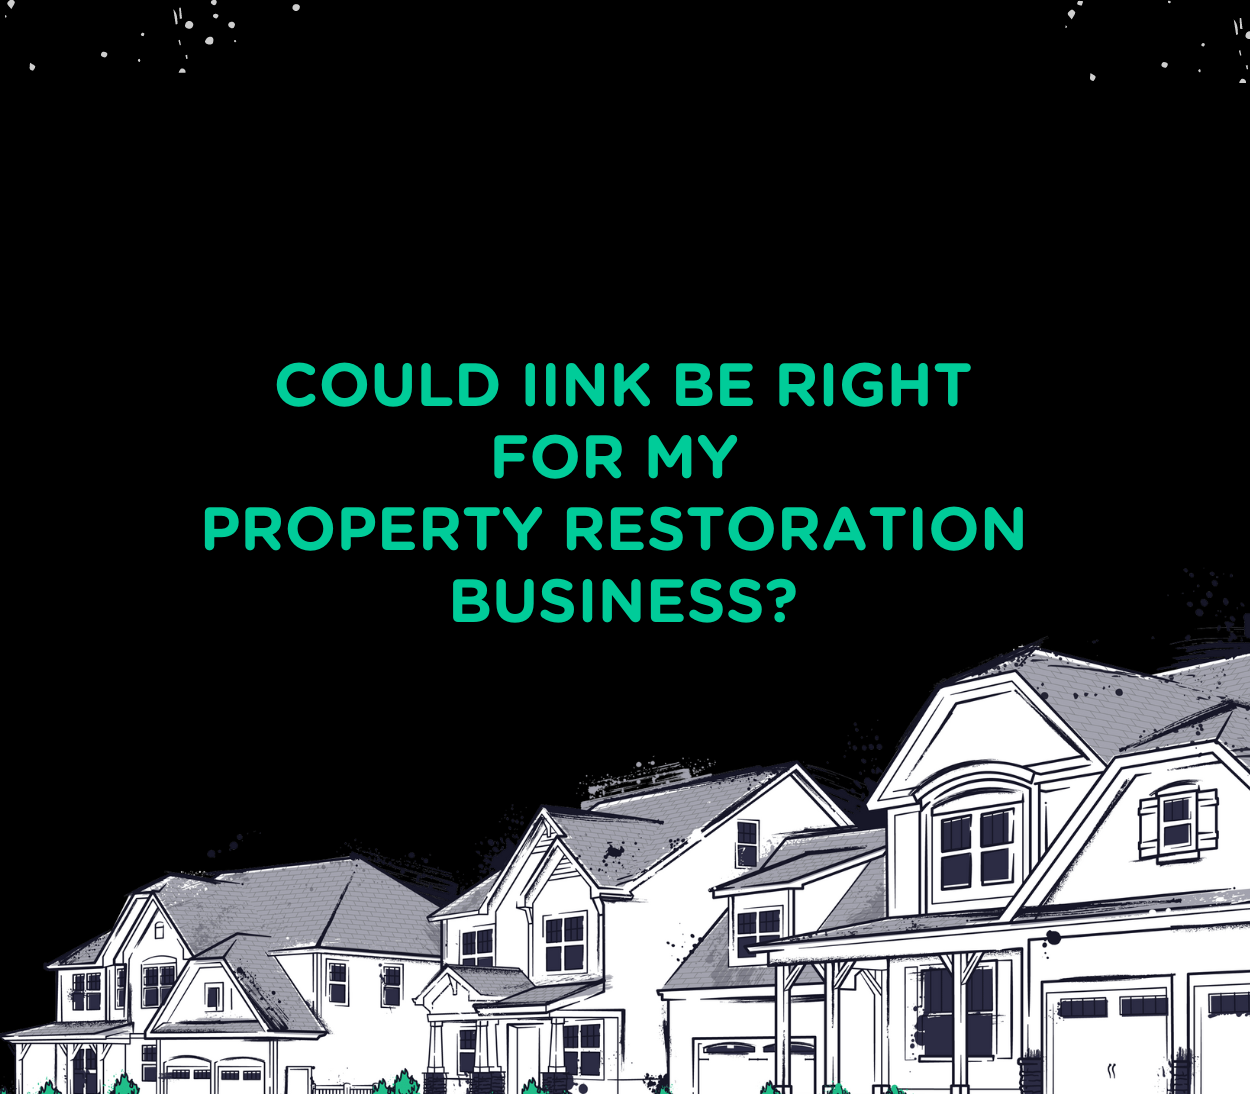 https://iink.com/images/articles/iink-right-for-business-thumbnail-3.png